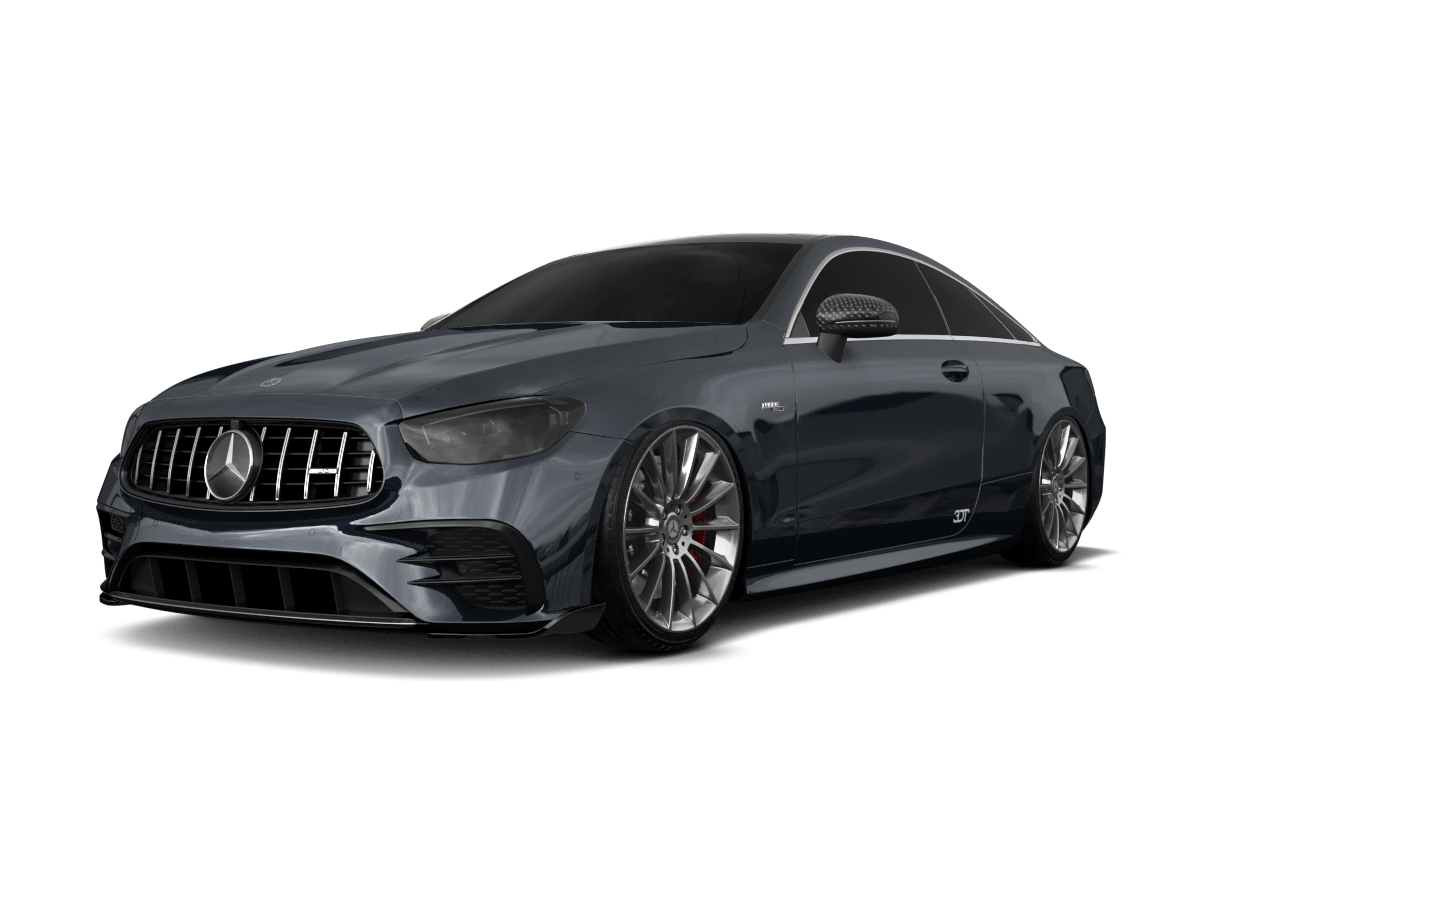 Mercedes E-Class Coupe 2021 tuning